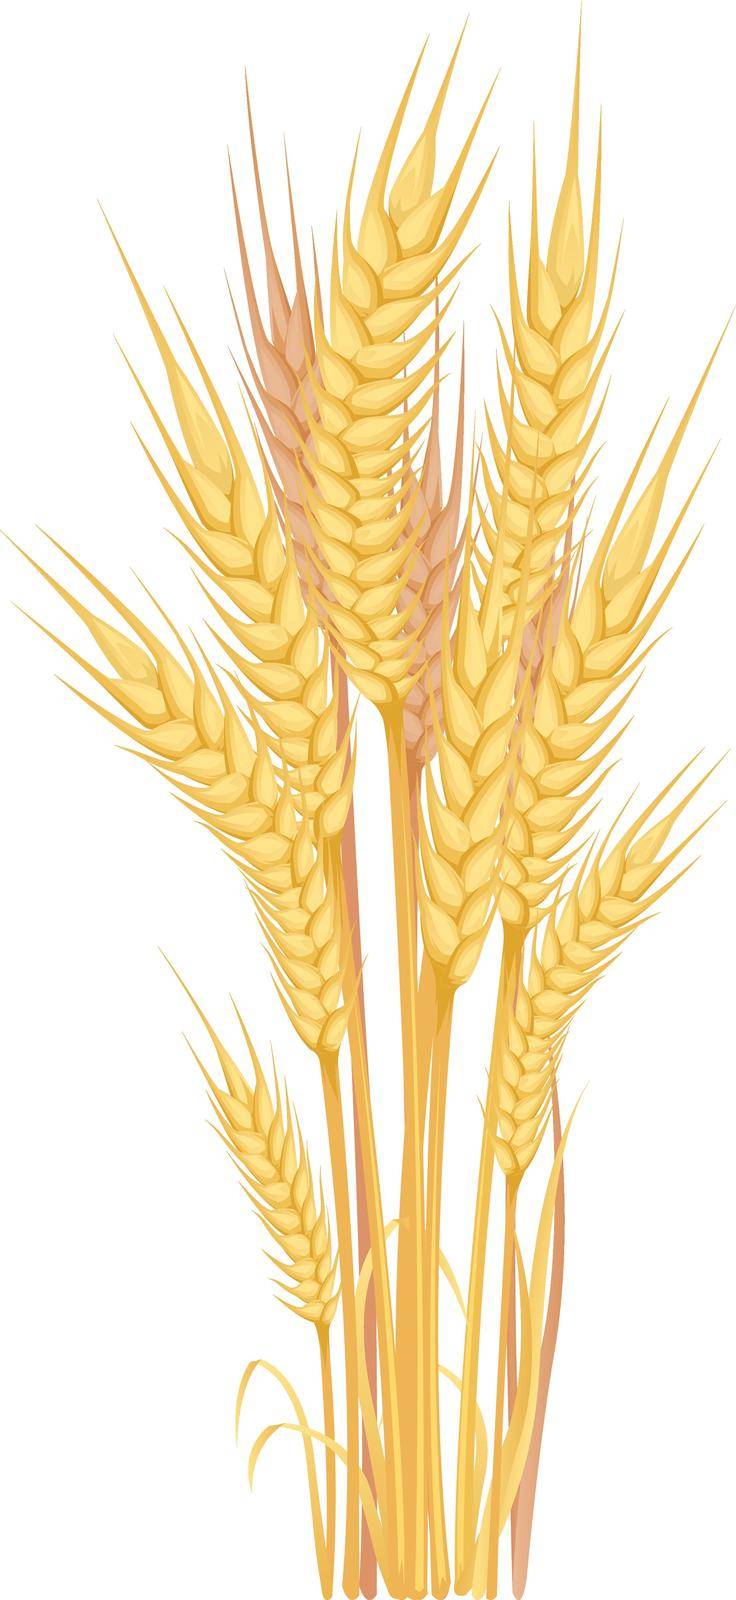 Grain crops bouquet. Harvest symbol. Cartoon ears isolated on white background